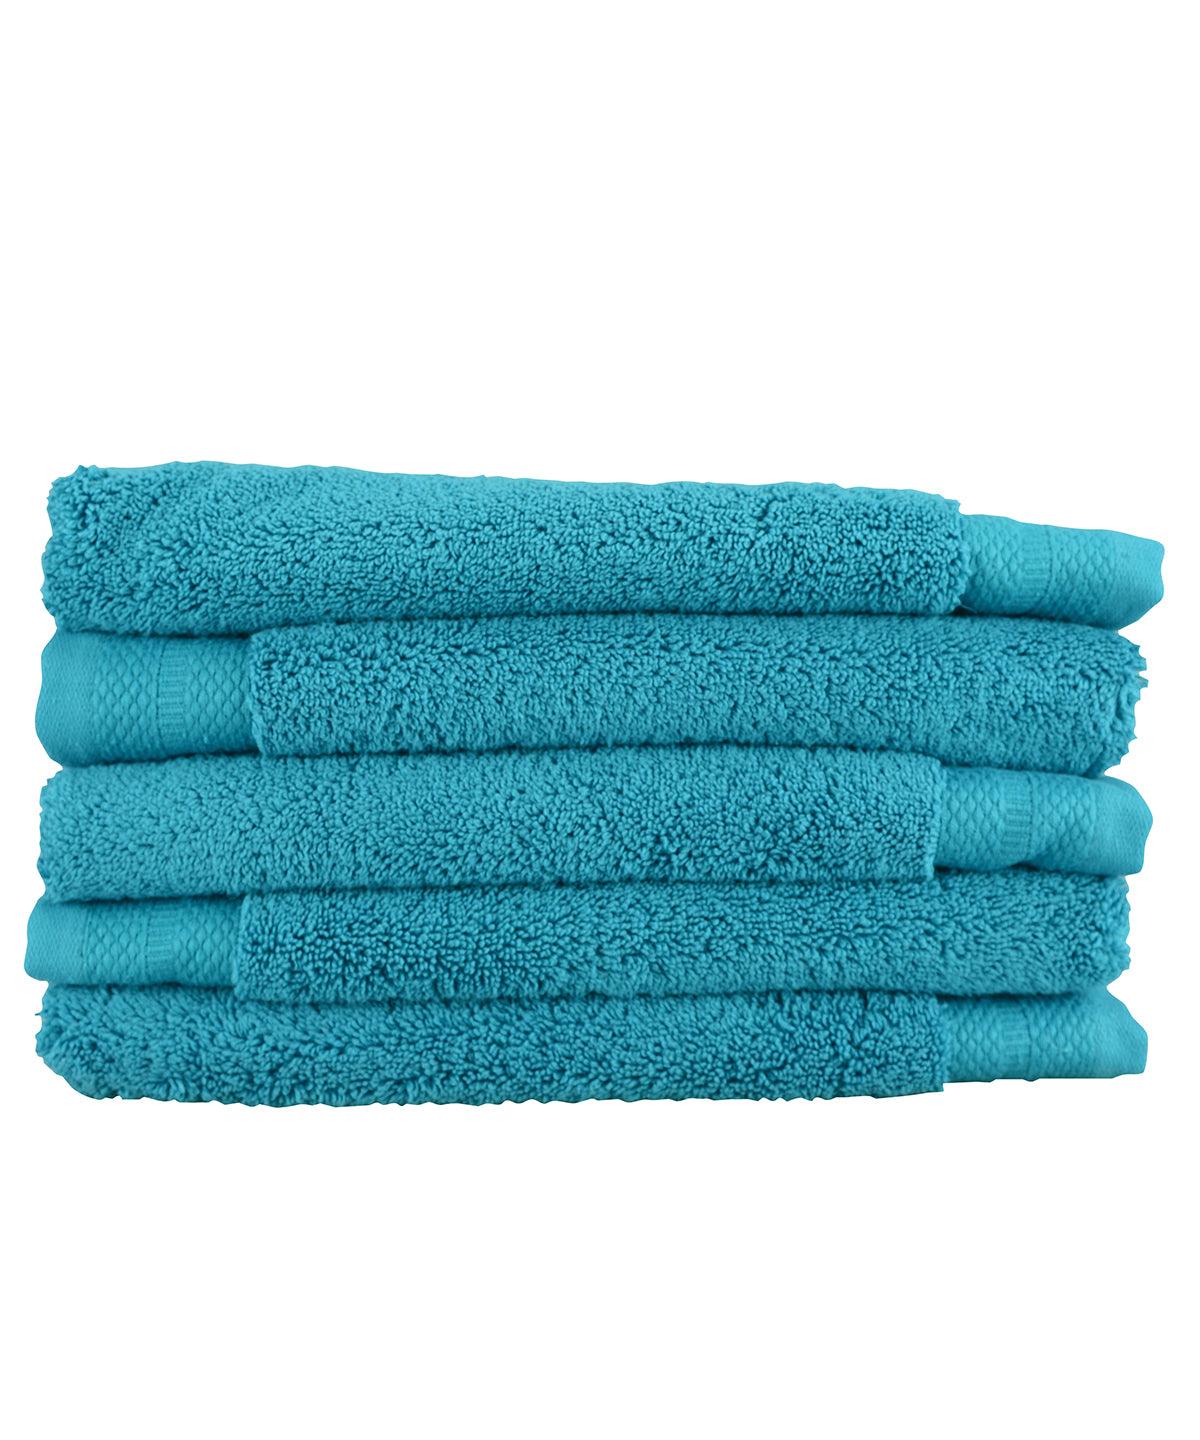 Pure Blue - ARTG® Pure luxe guest towel Towels A&R Towels Gifting & Accessories, Homewares & Towelling Schoolwear Centres